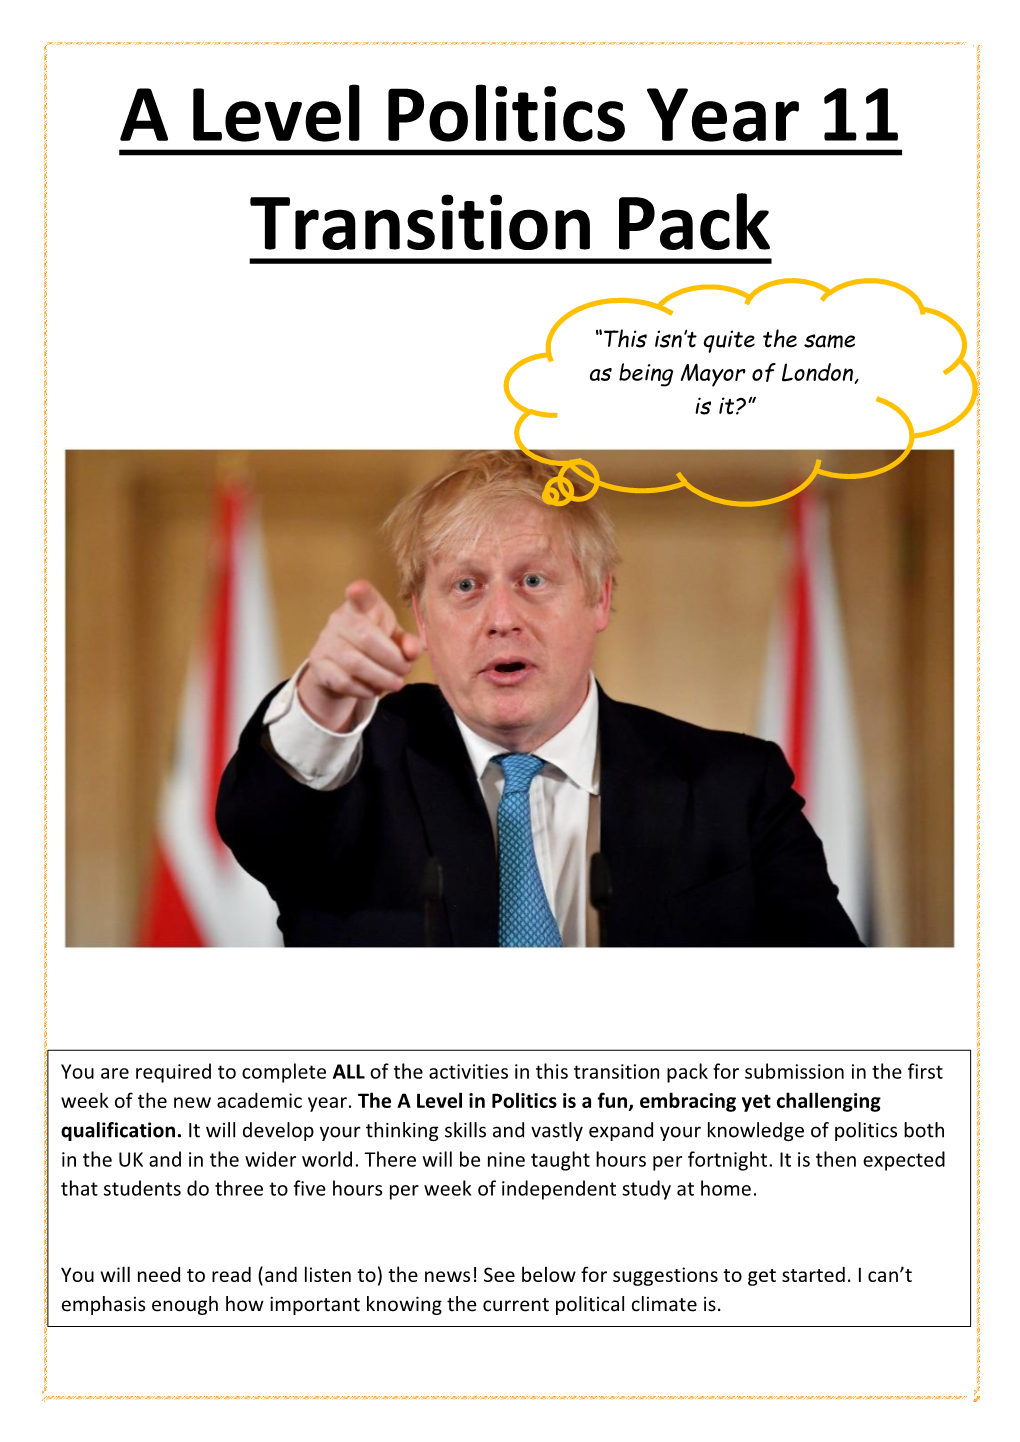 A Level Politics Year 11 Transition Pack